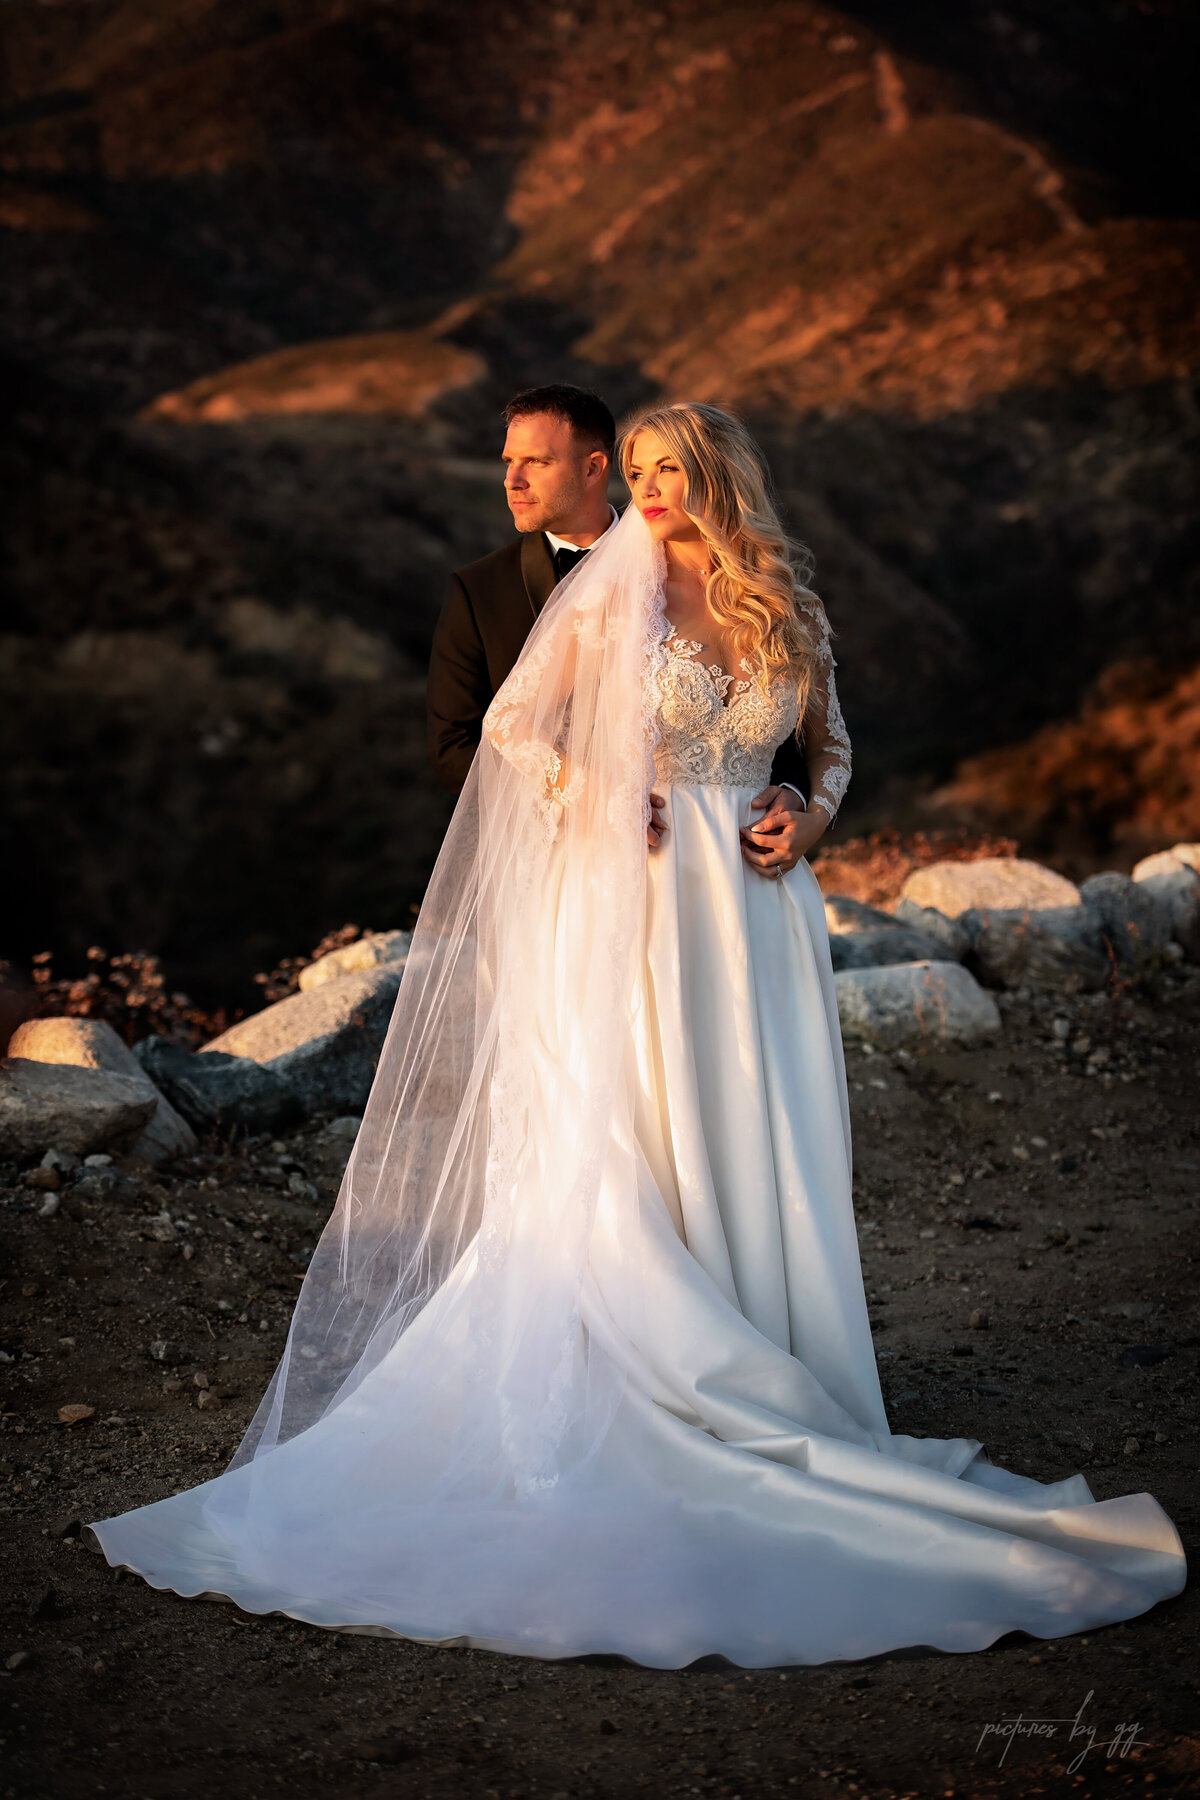 Bride and groom lit up by golden light in Serendipity Garden California surrounded by mountains